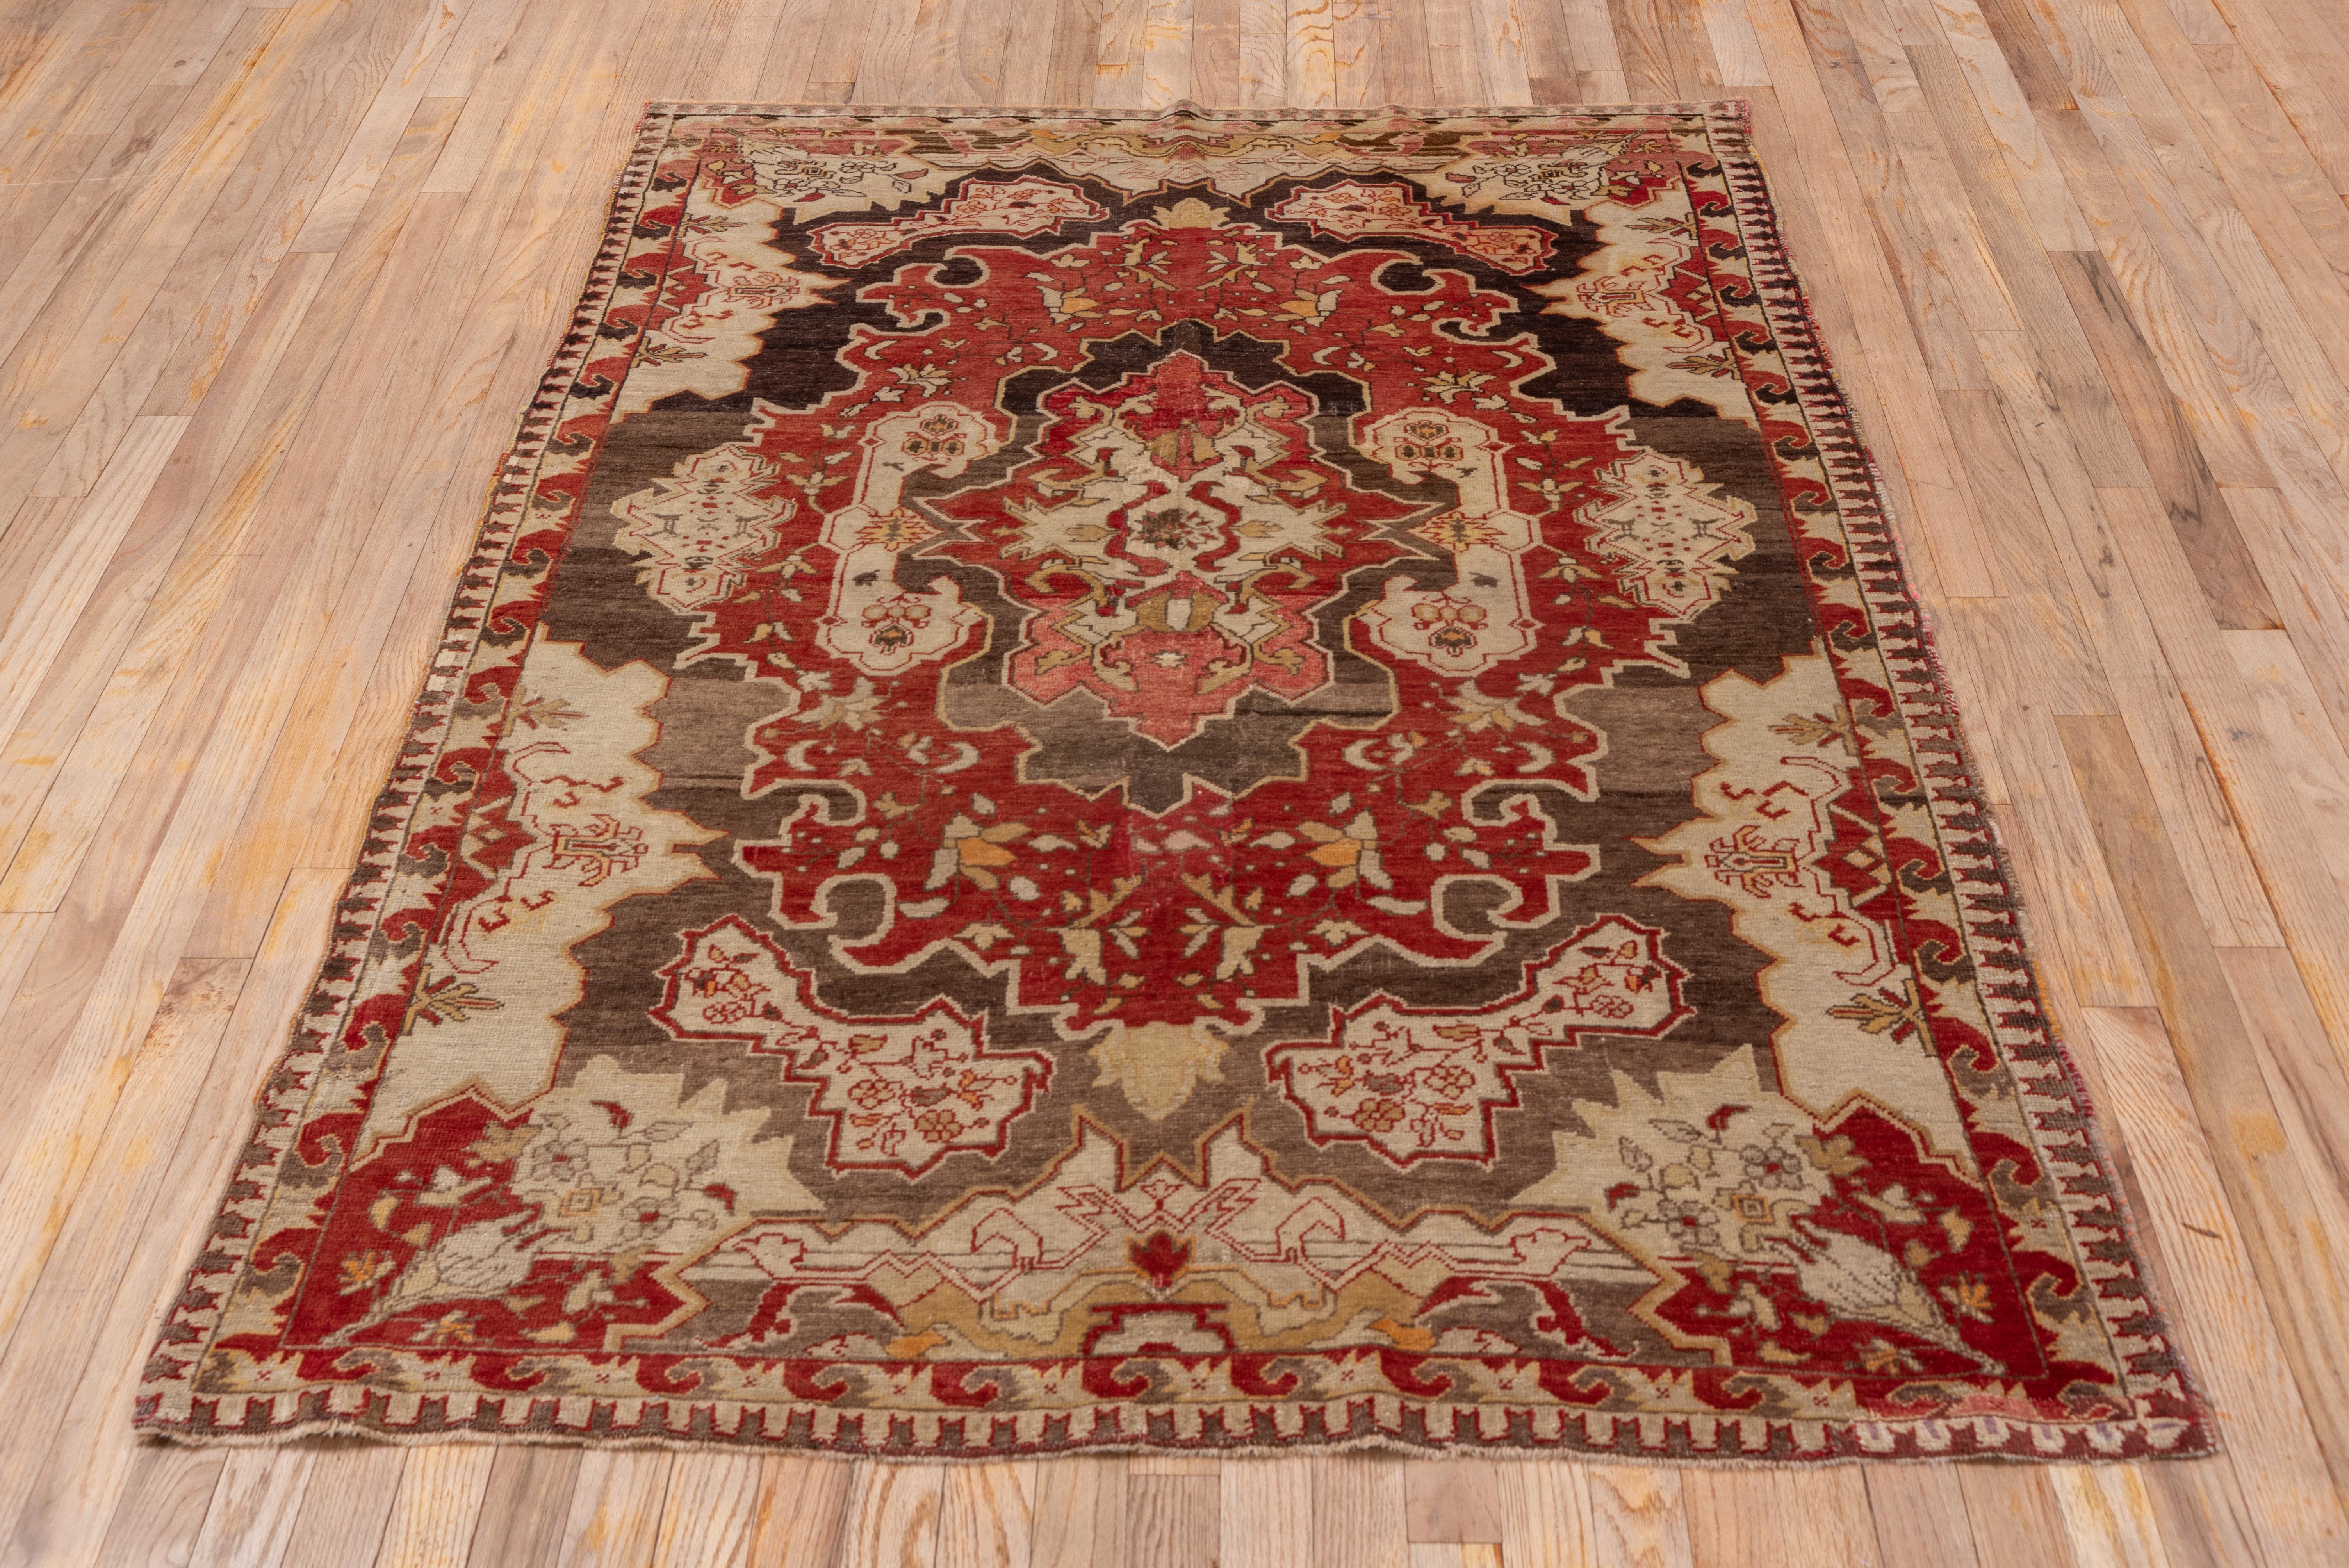 Tribal Fine Antique Turkish Sivas Rug, Red and Brown Tones, circa 1930s For Sale